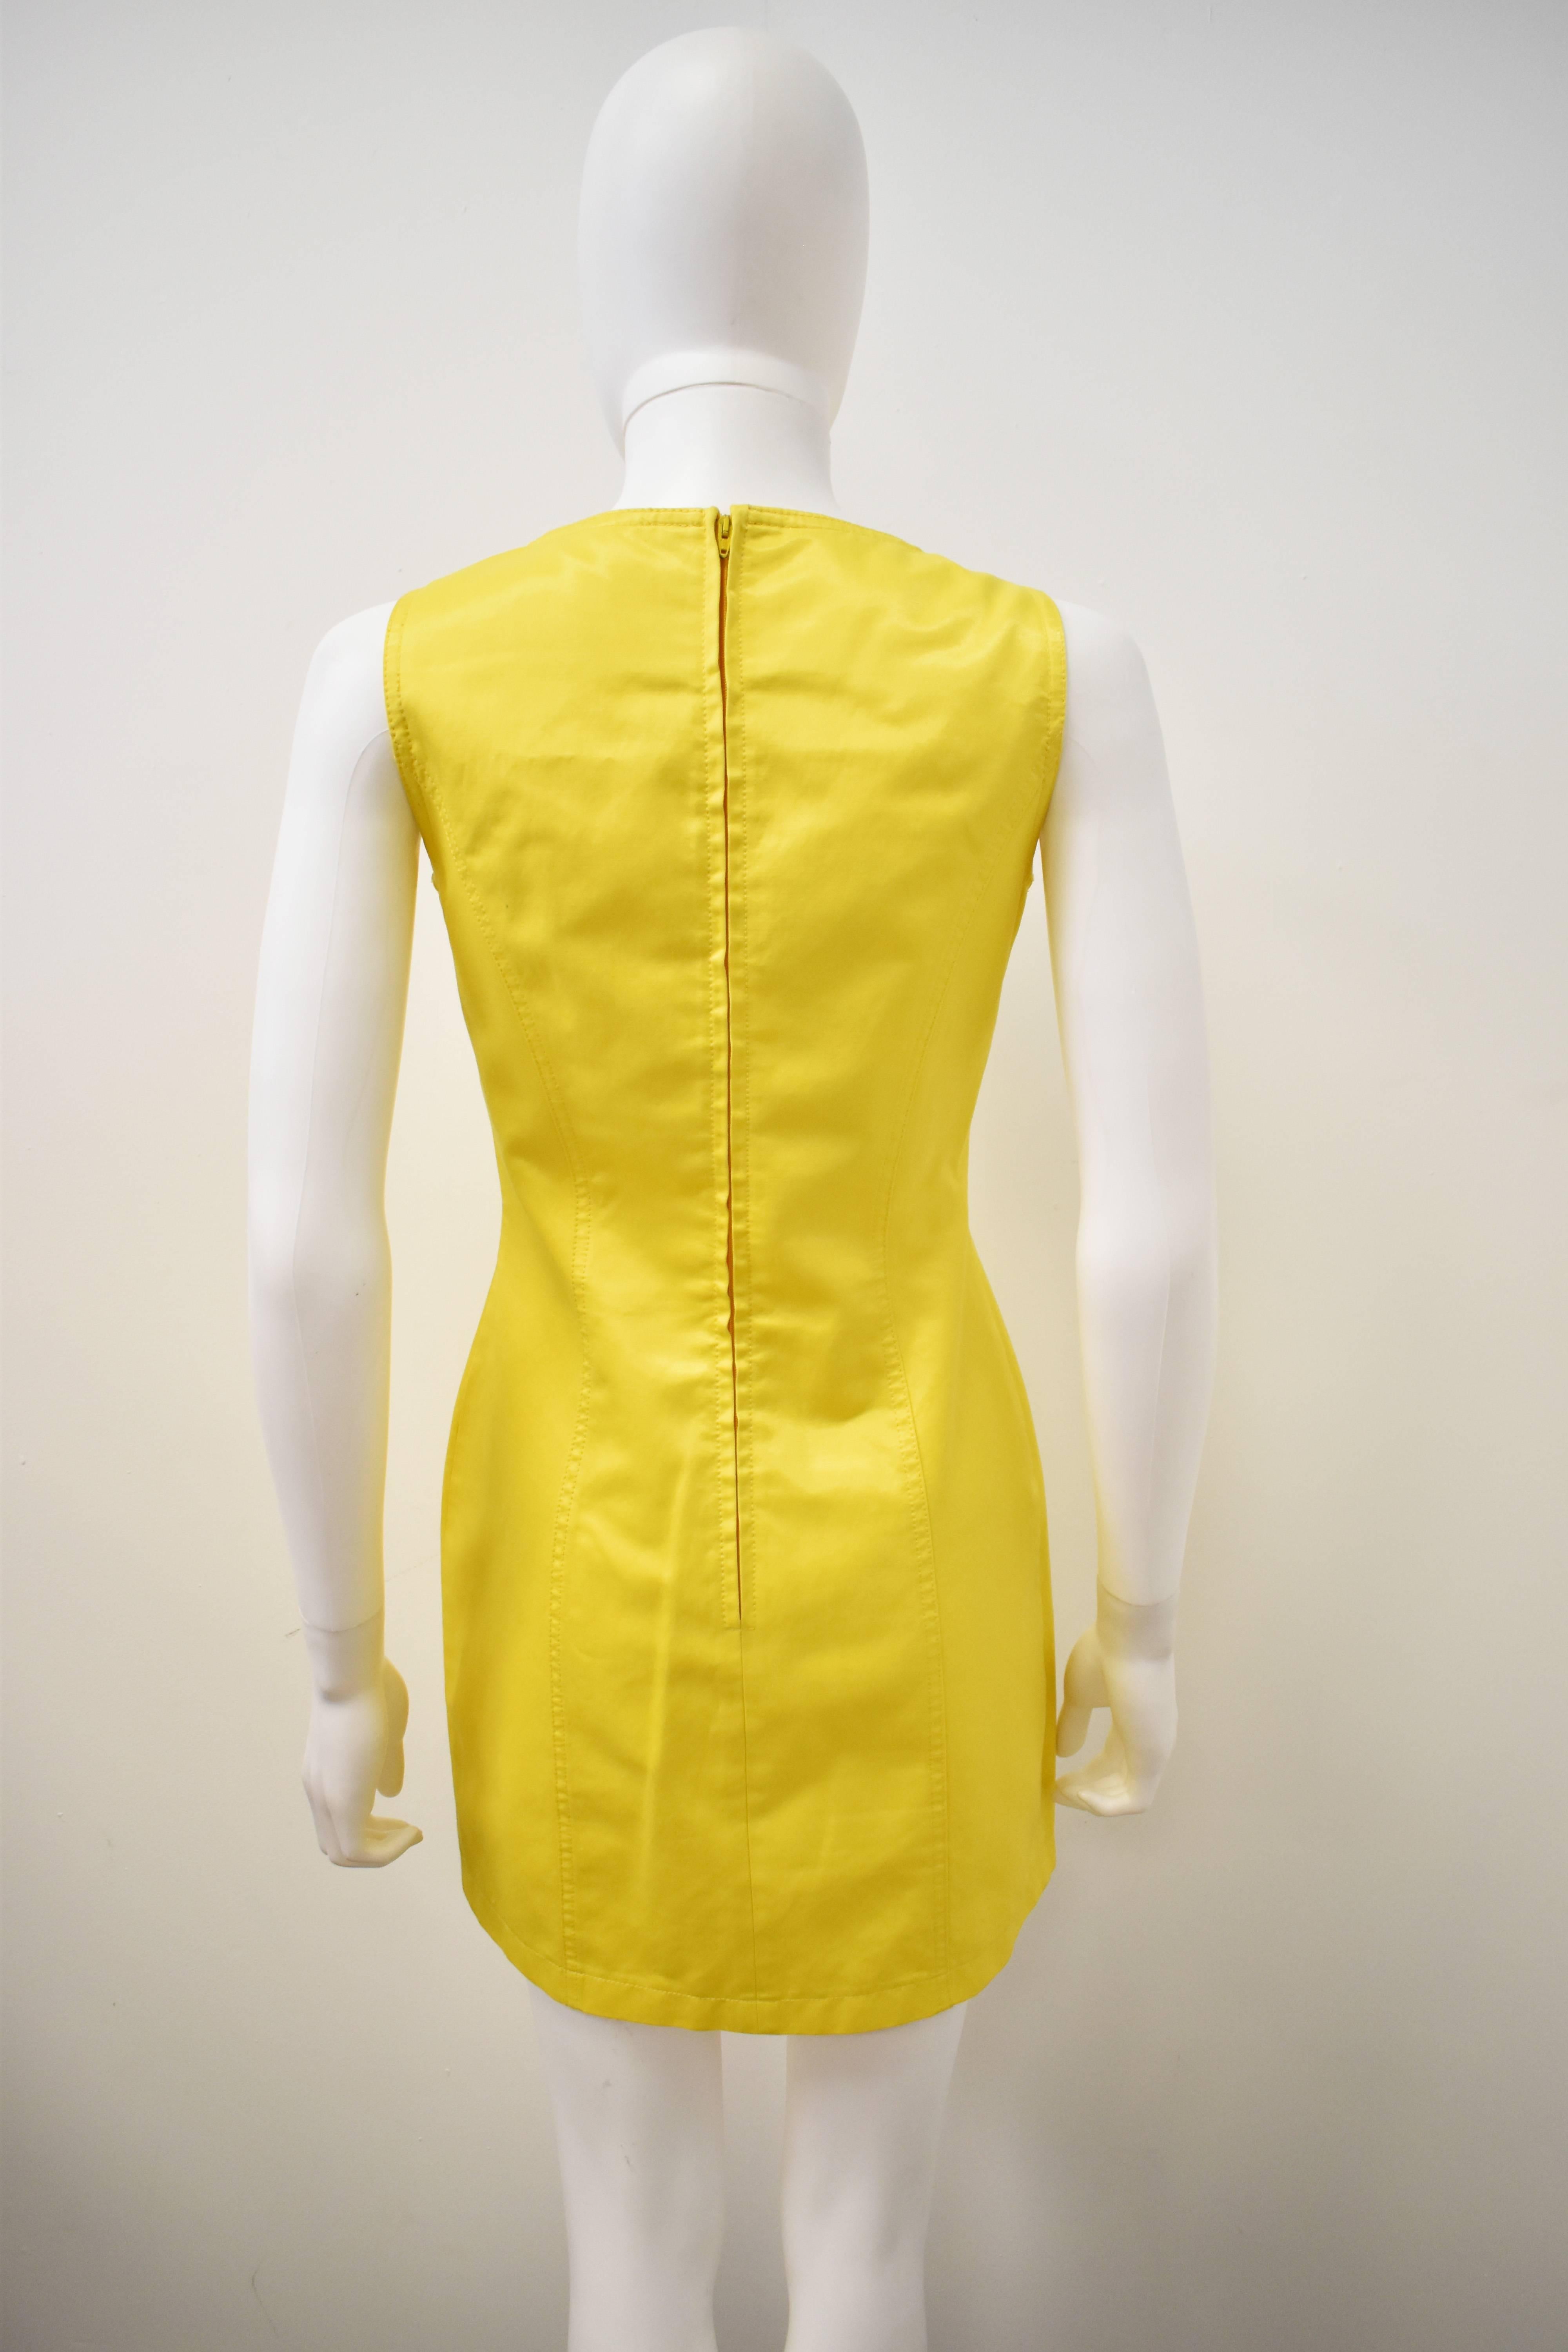 Moschino Jeans Yellow Fitted Mini Dress 1990’s 2